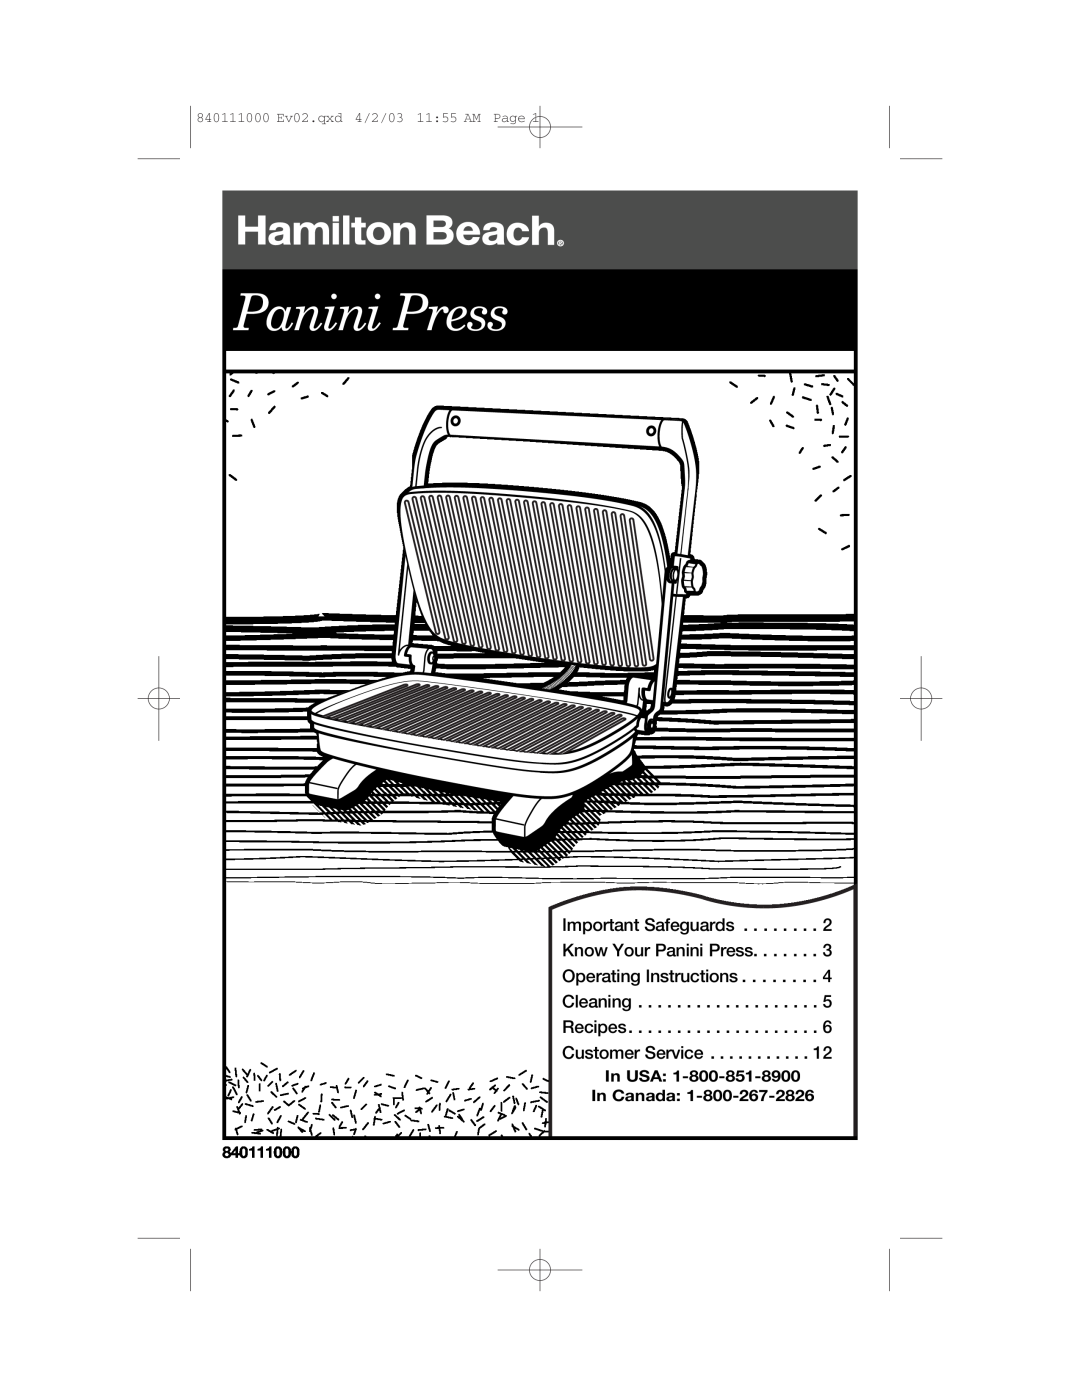 Hamilton Beach 25450 operating instructions Important Safeguards, Know Your Panini Press, Operating Instructions 